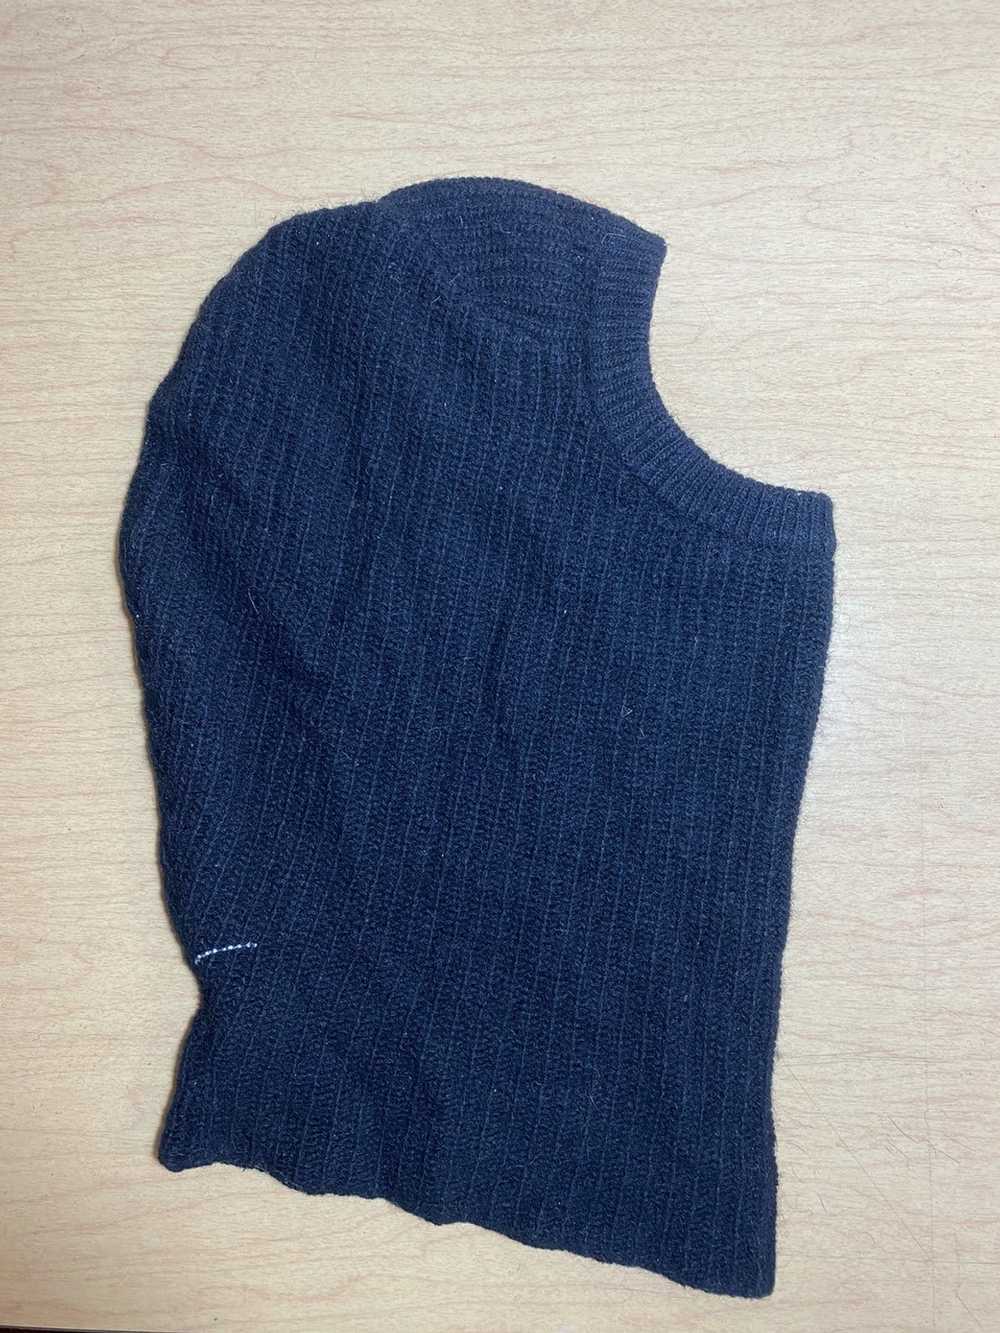 First Aid To The Injured WOOL KNIT BALACLAVA - image 2